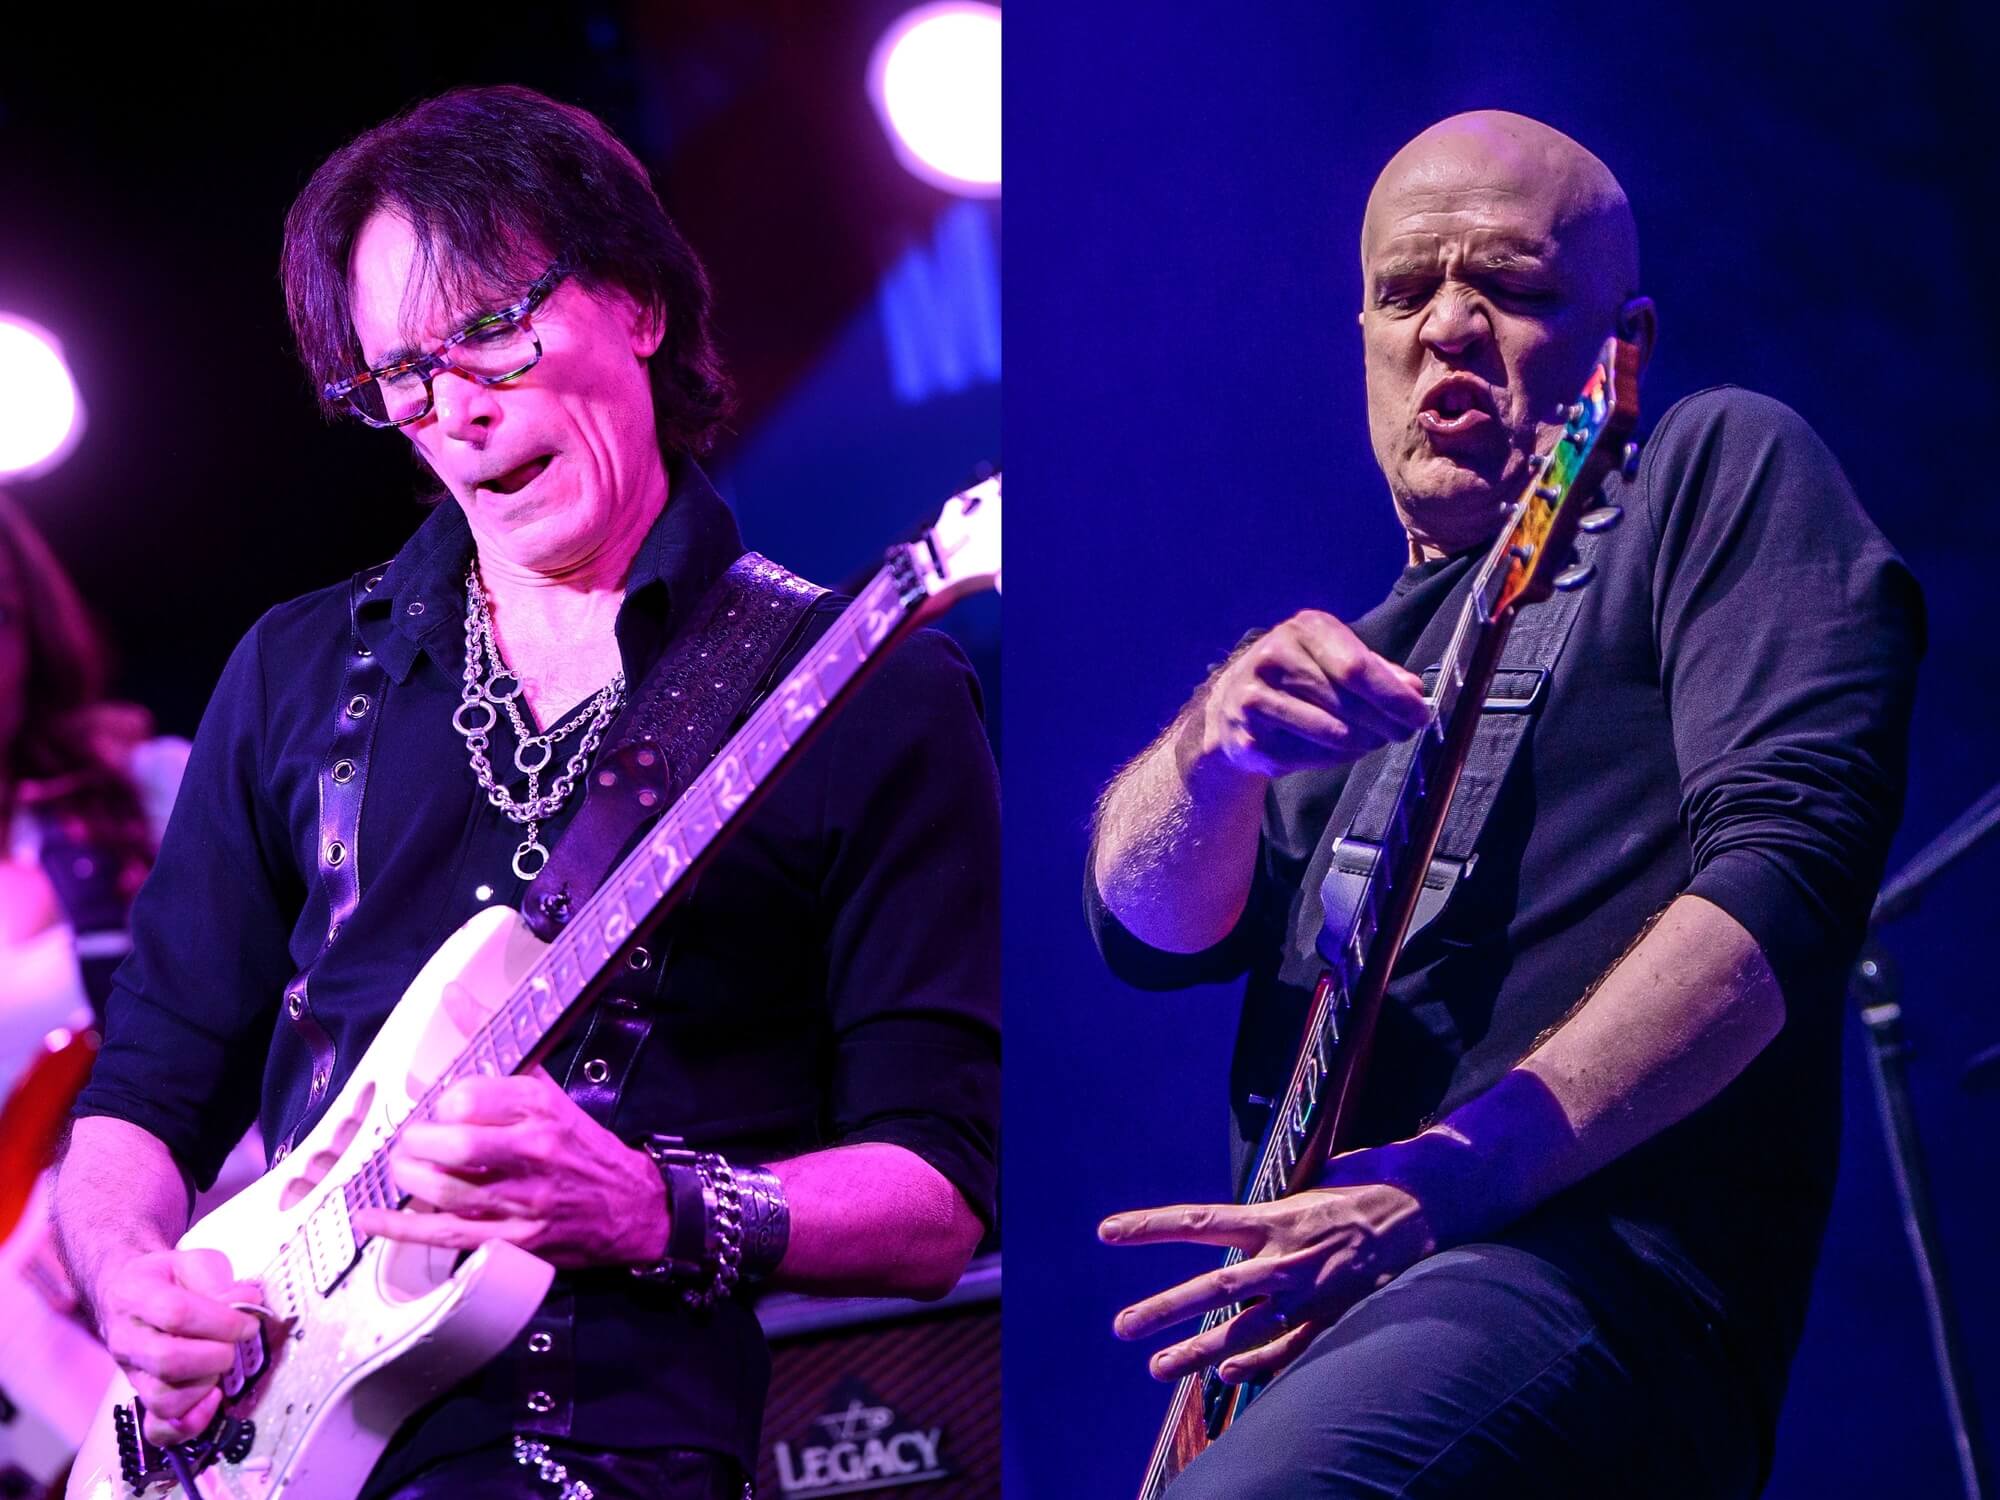 Steve Vai and Devin Townsend